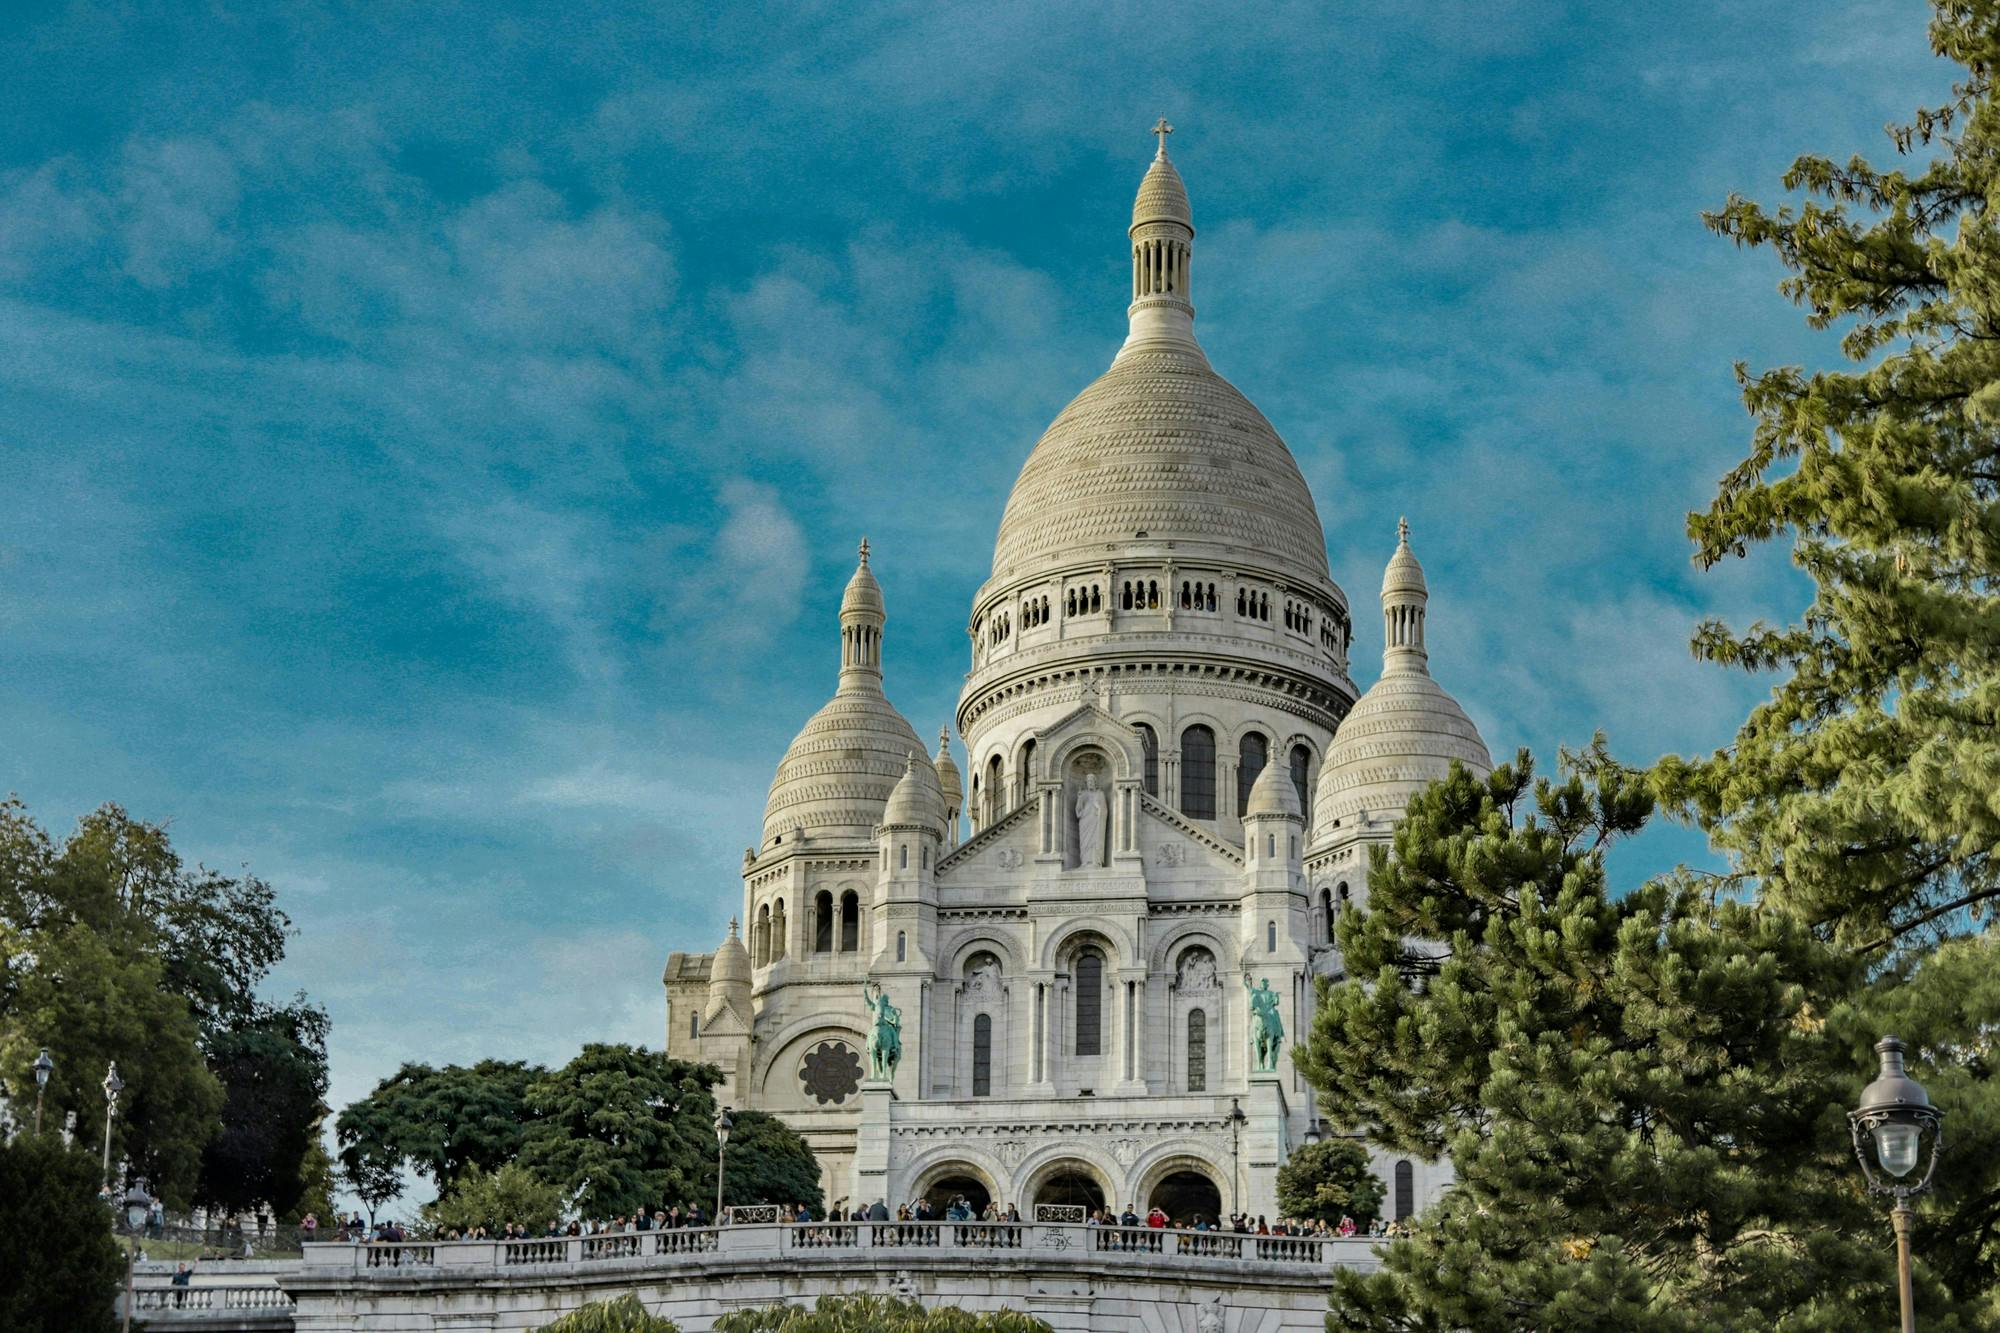 Low angle exterior of famous Sacre Coeur Basilica with domes and arched windows located on Montmartre hill in Paris against blue sky